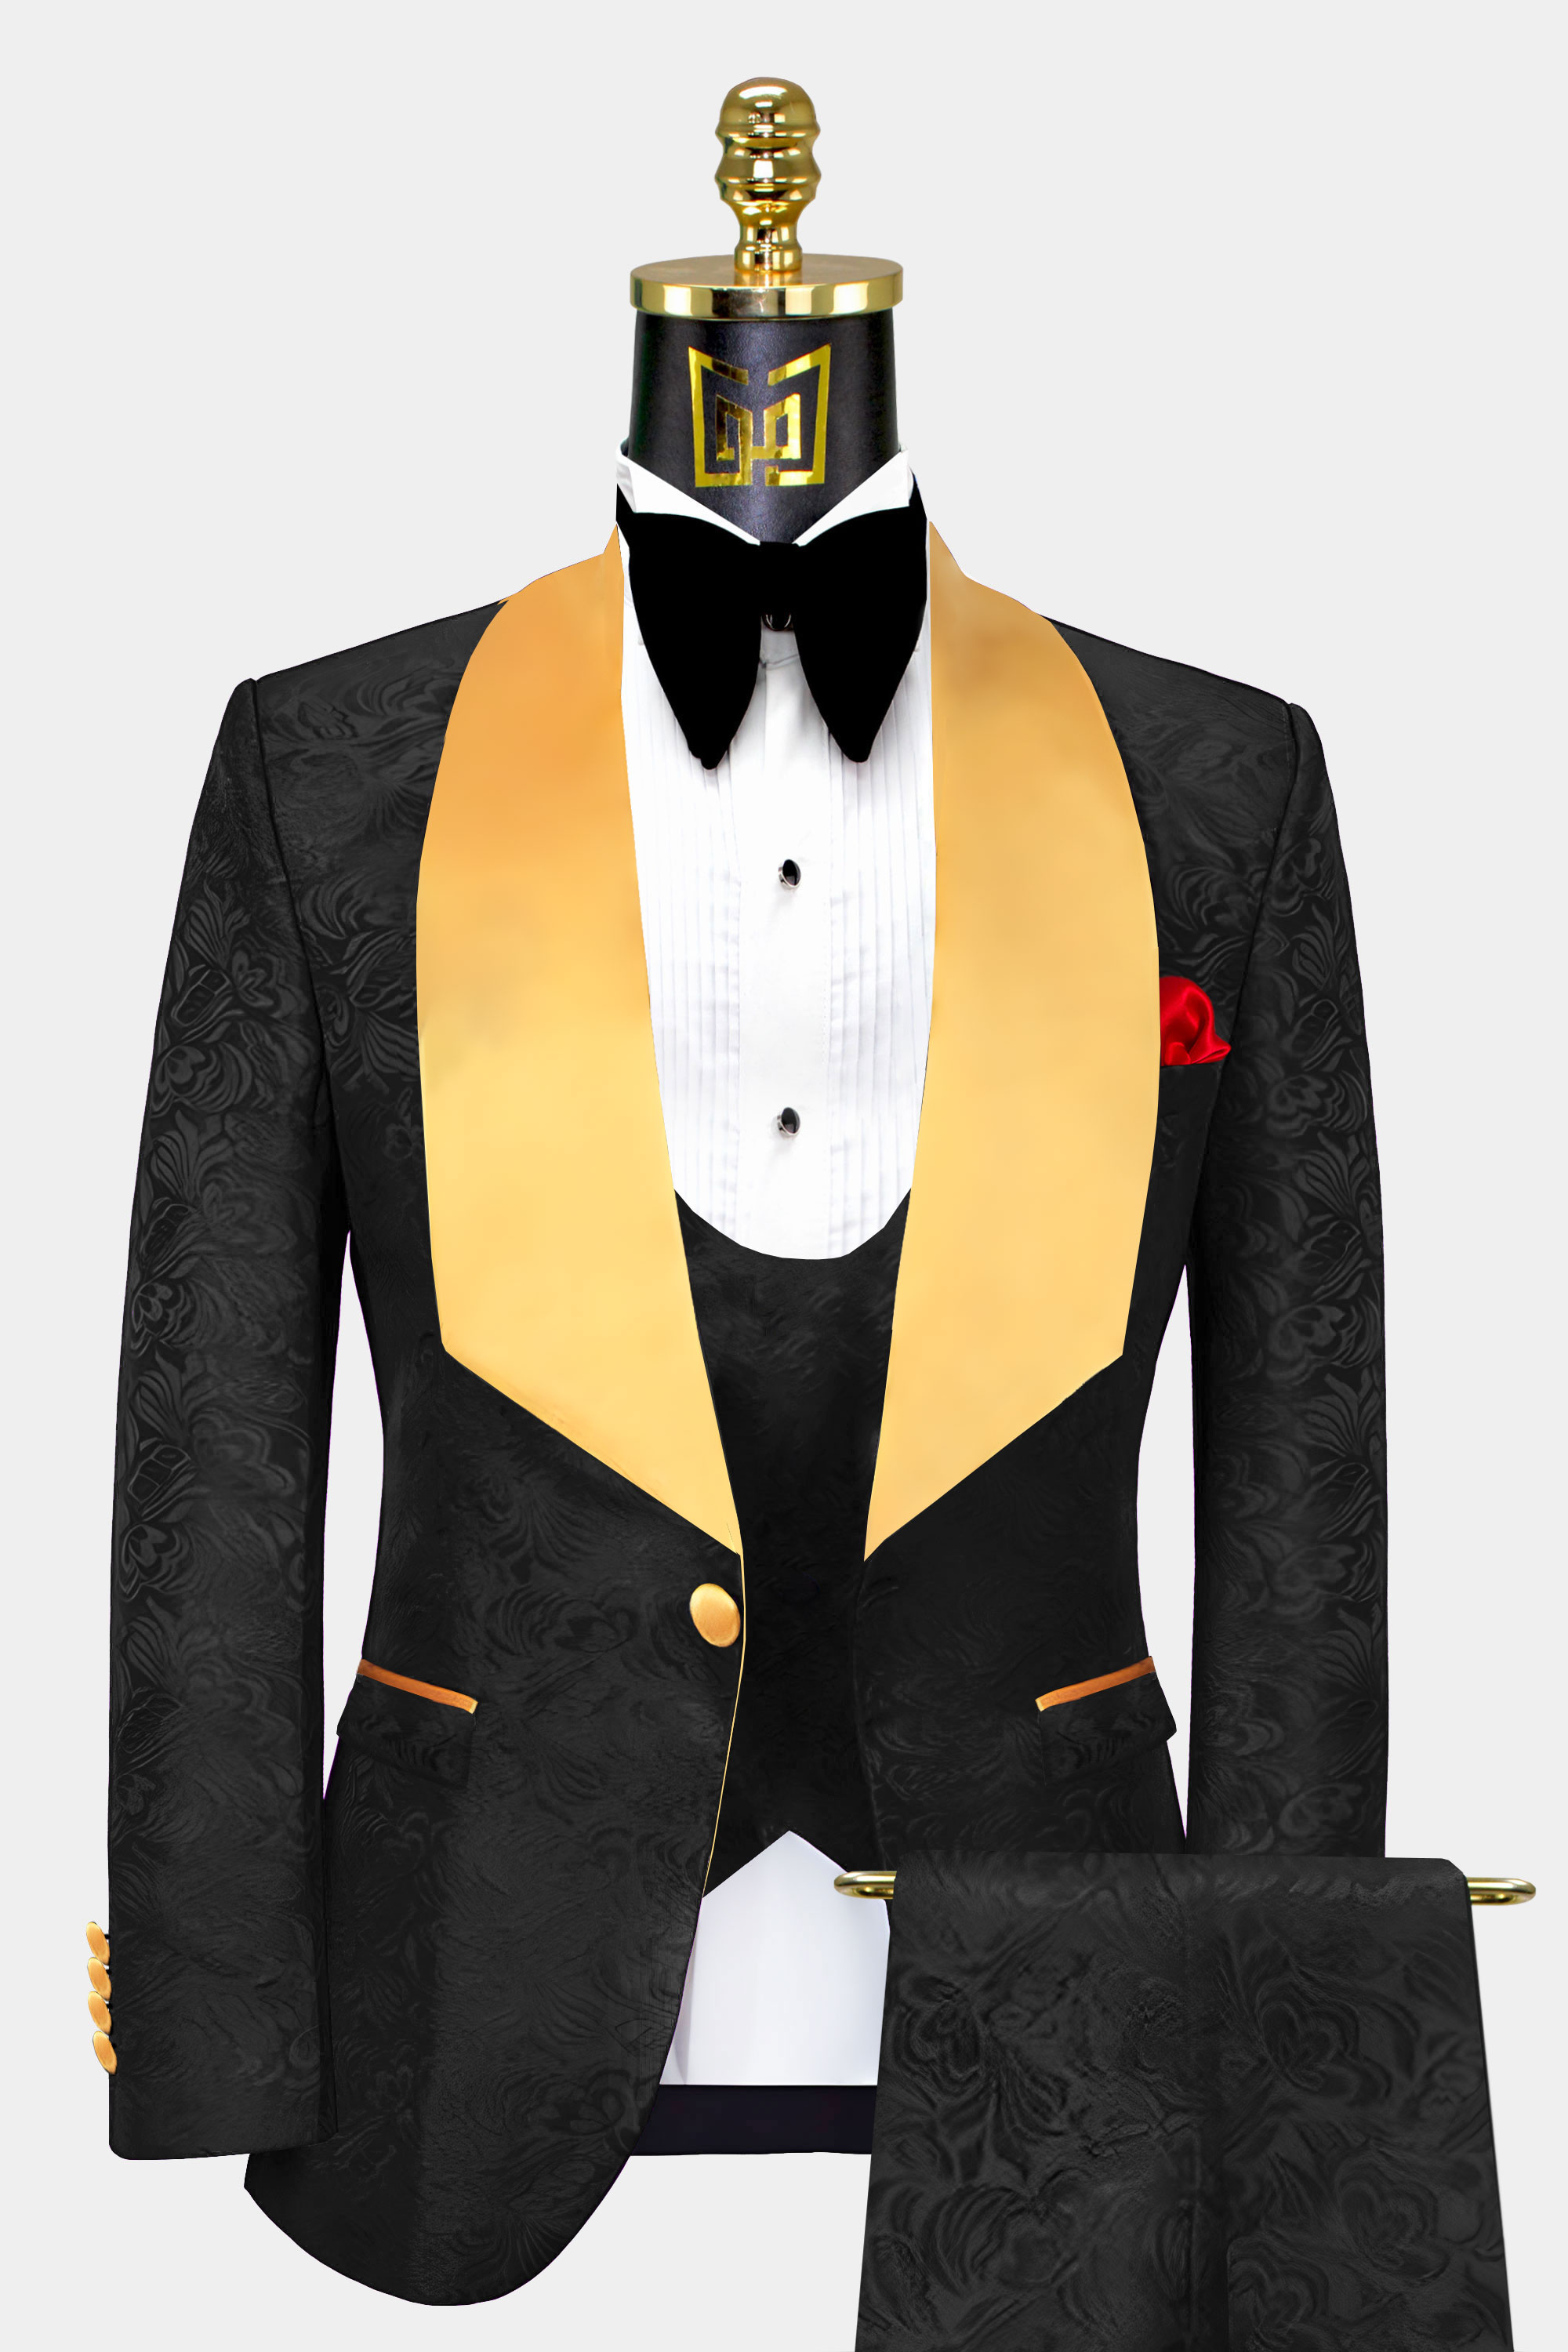 Black Floral Tuxedo with Gold Shawl Lapel - 3 Piece 42r